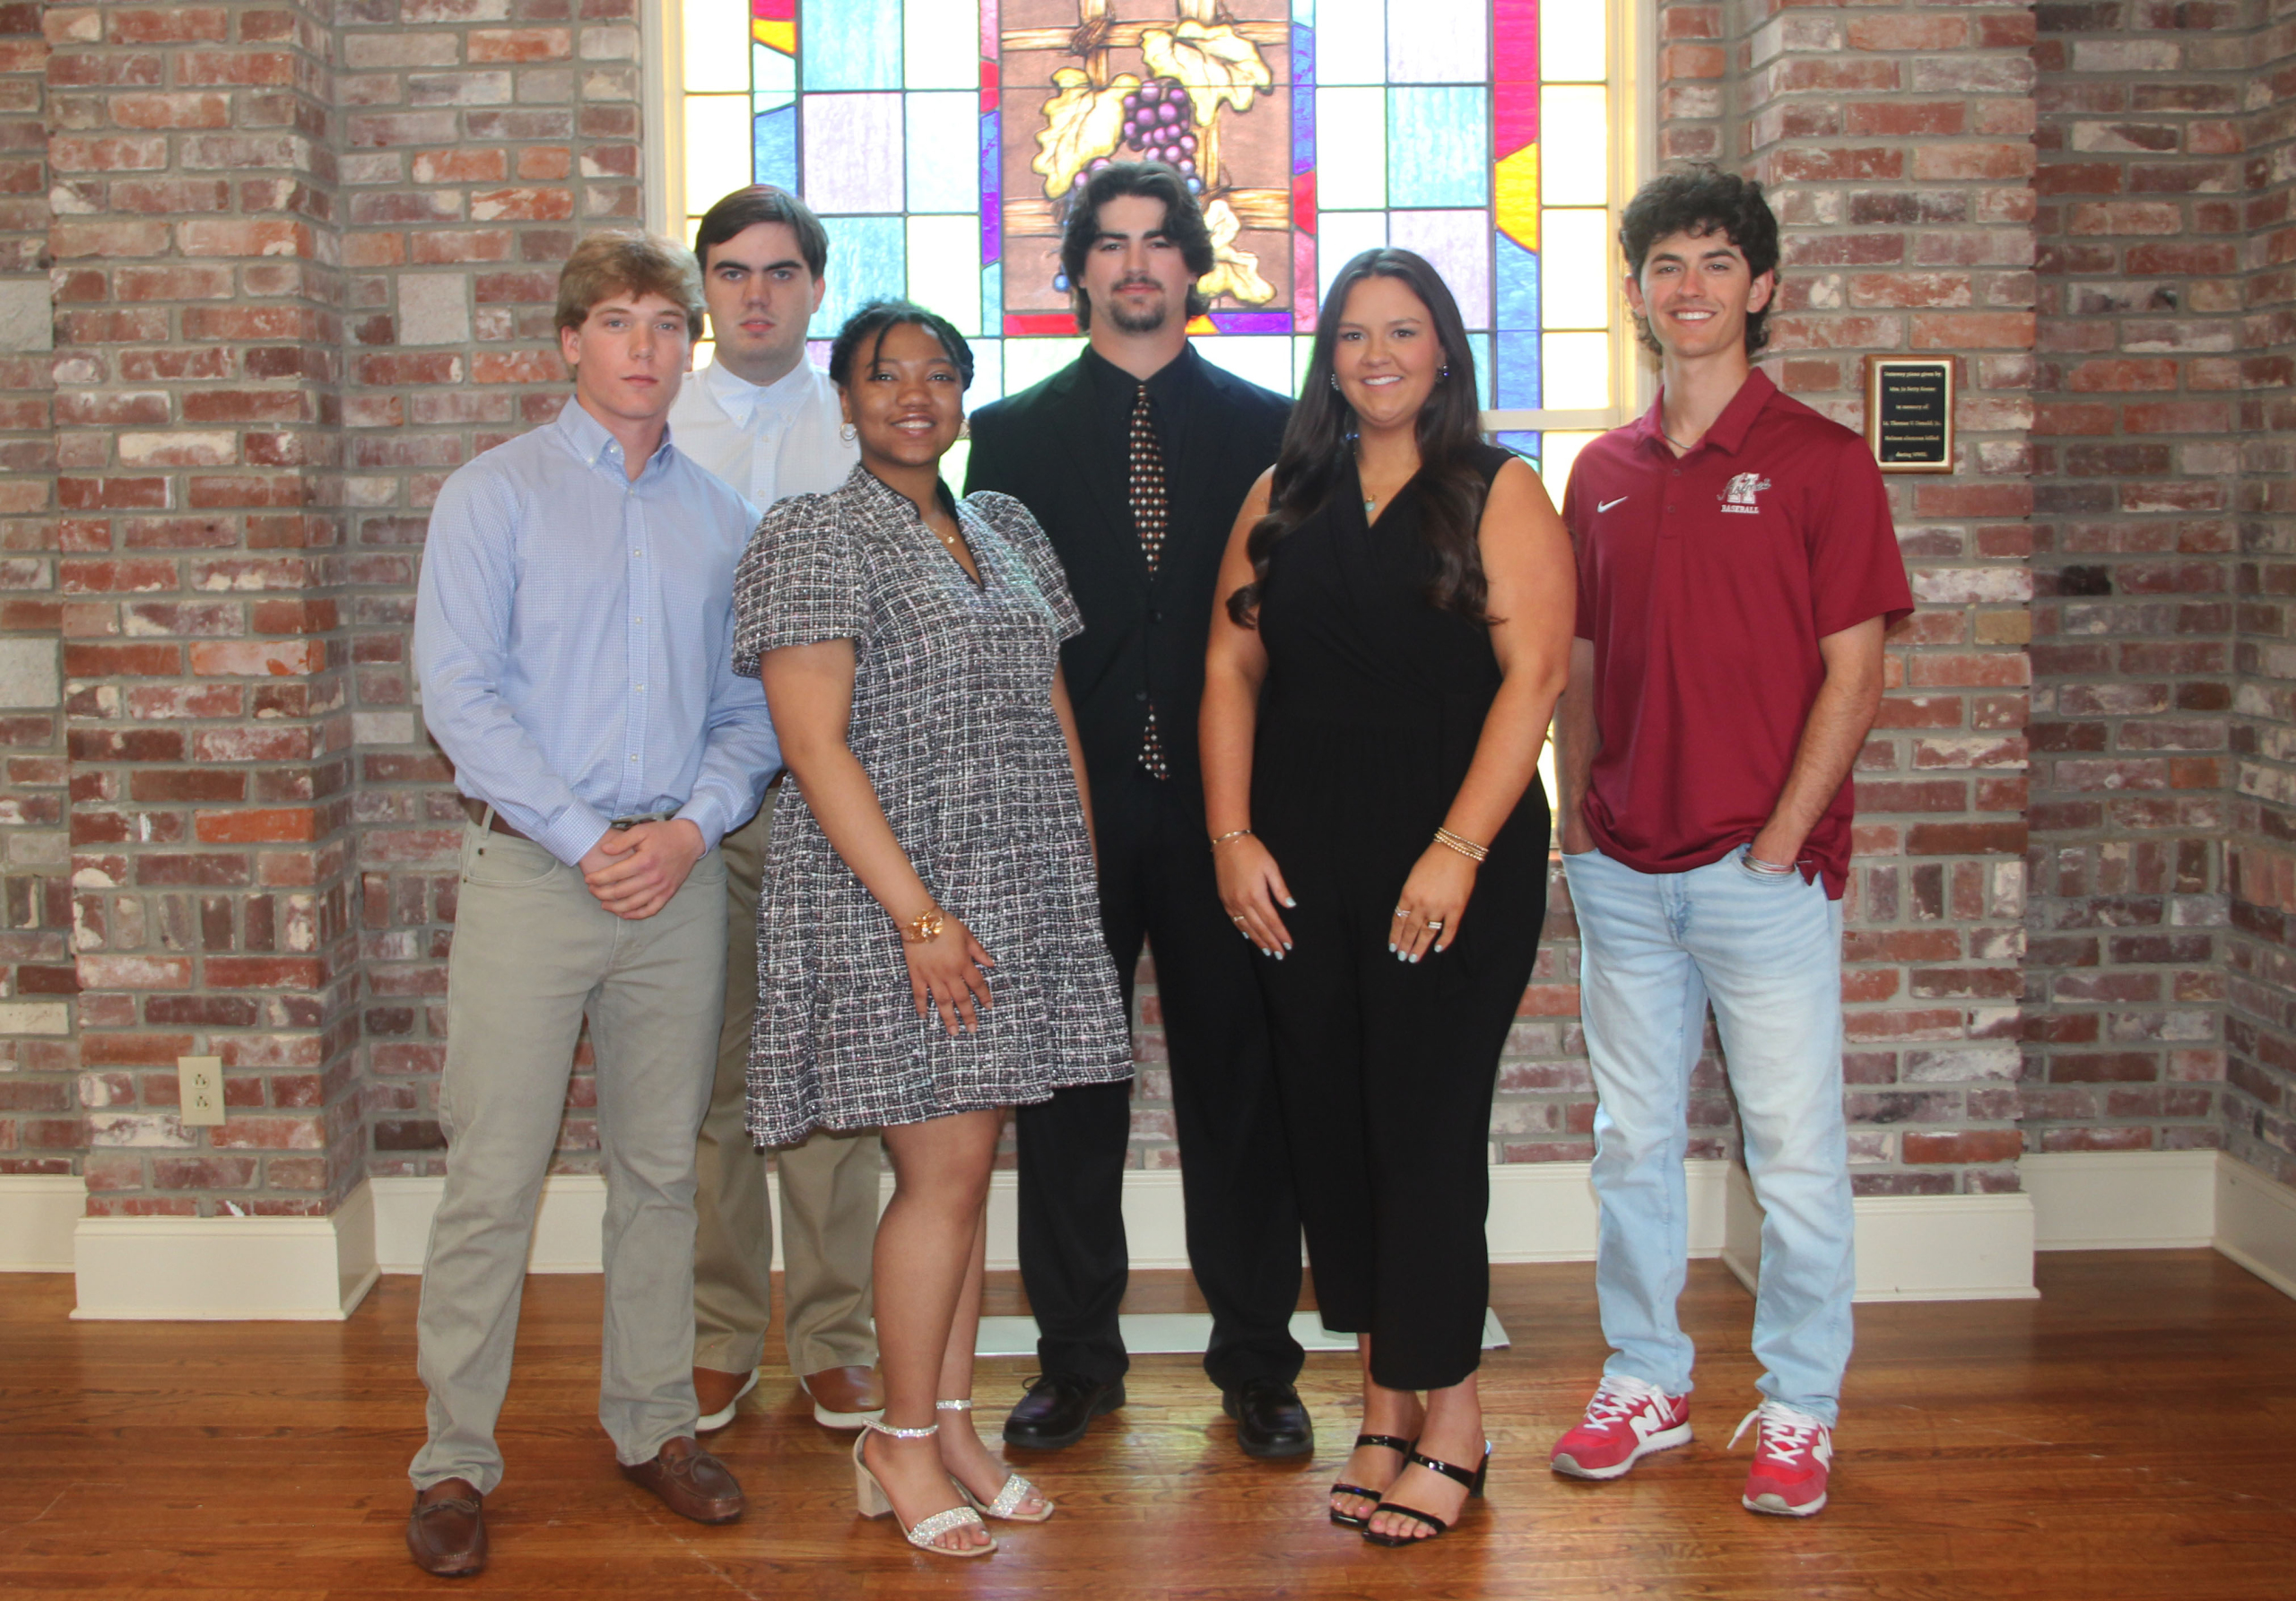 Six Goodman students inducted into the Holmes Hall of Fame